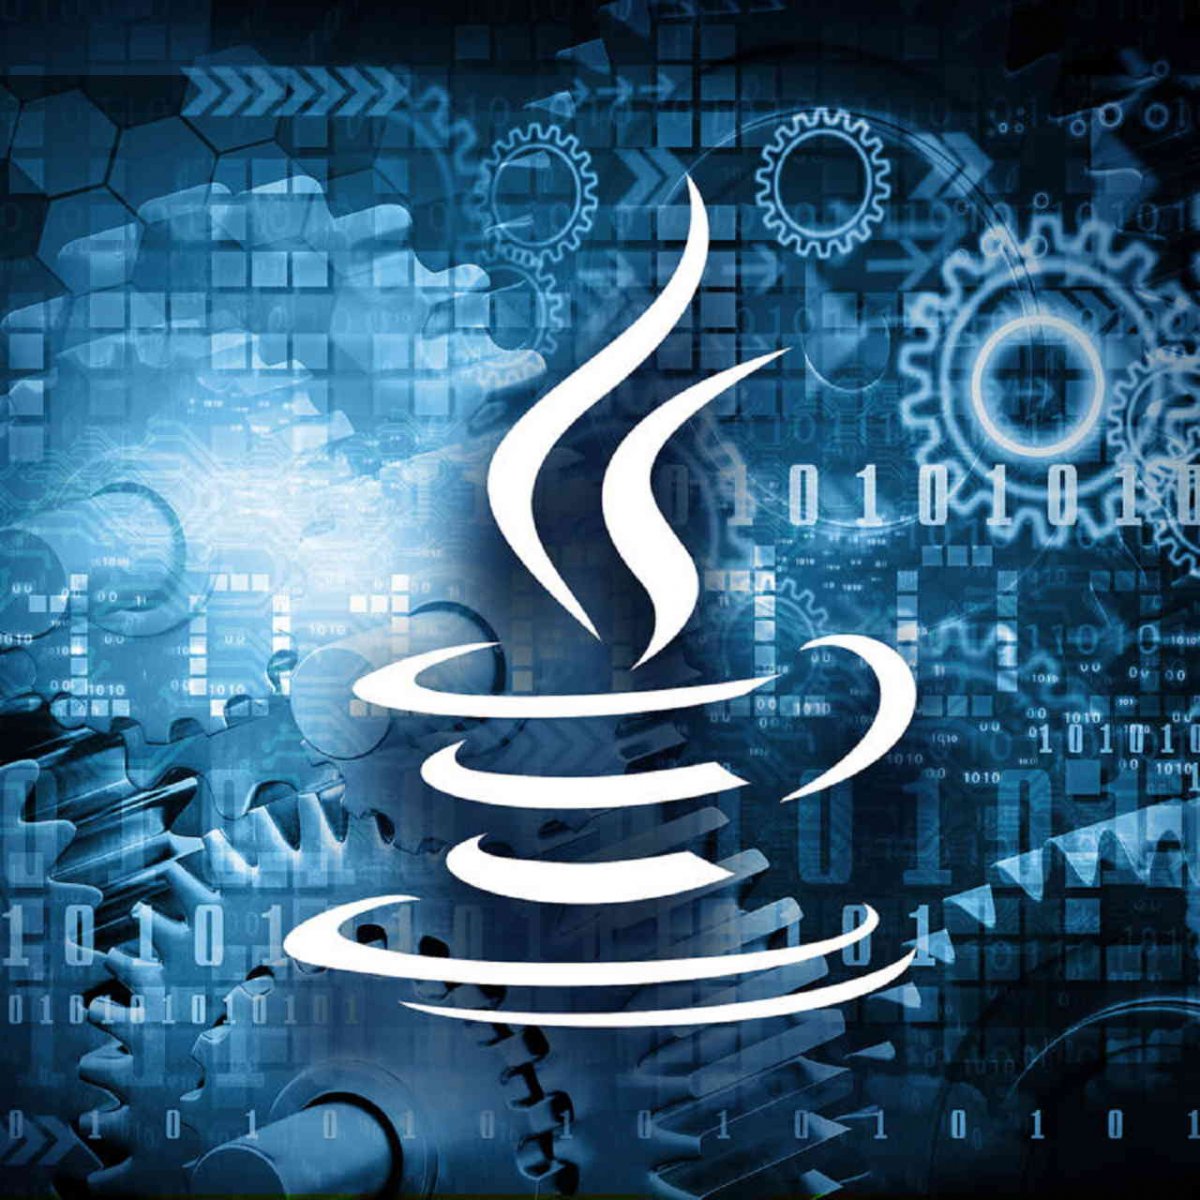 java 1.7.0 virtual machine could not be found